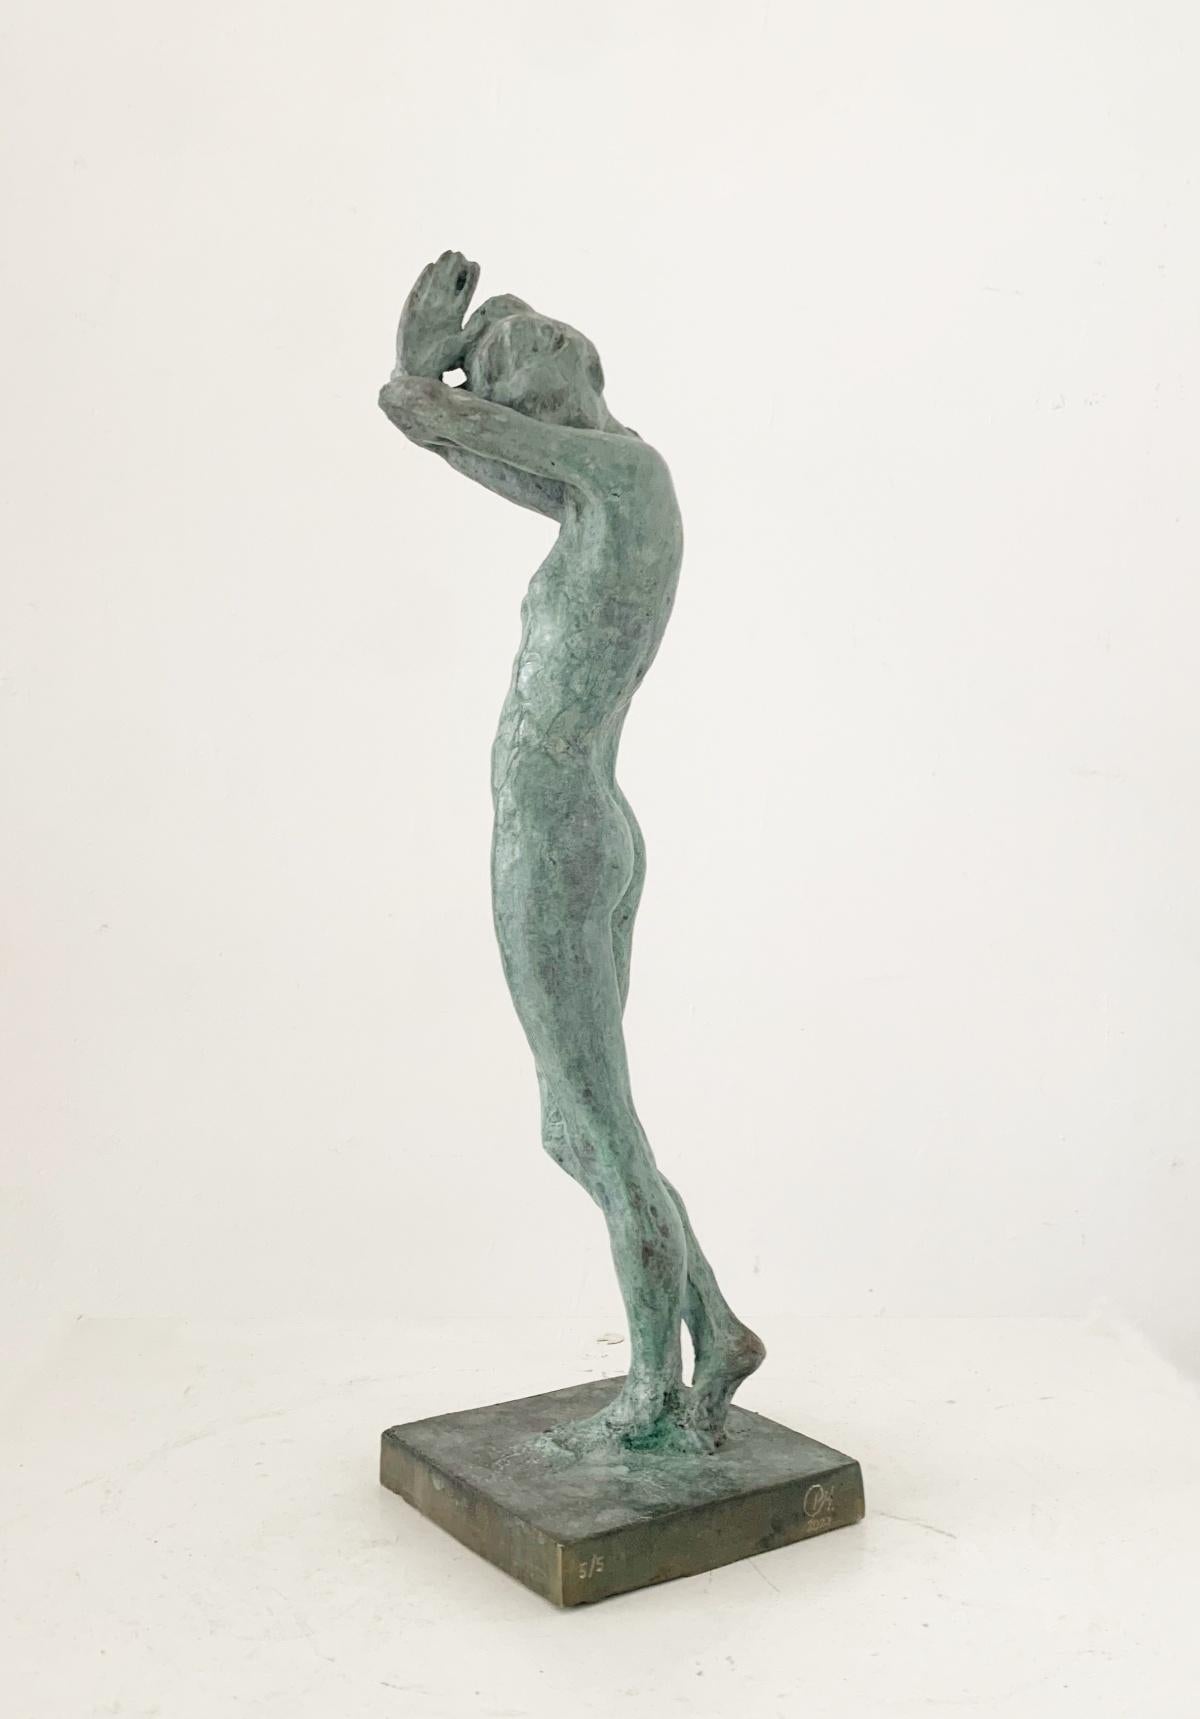 Limited edition bronze sculpture by Polish artist Olga Prokop-Misniakiewicz. Artist signes her artworks by hand, using engraving tool. Edition of 5. Olga Prokop-Misniakiewicz likes to experiment with art matter in her creations so in editions the